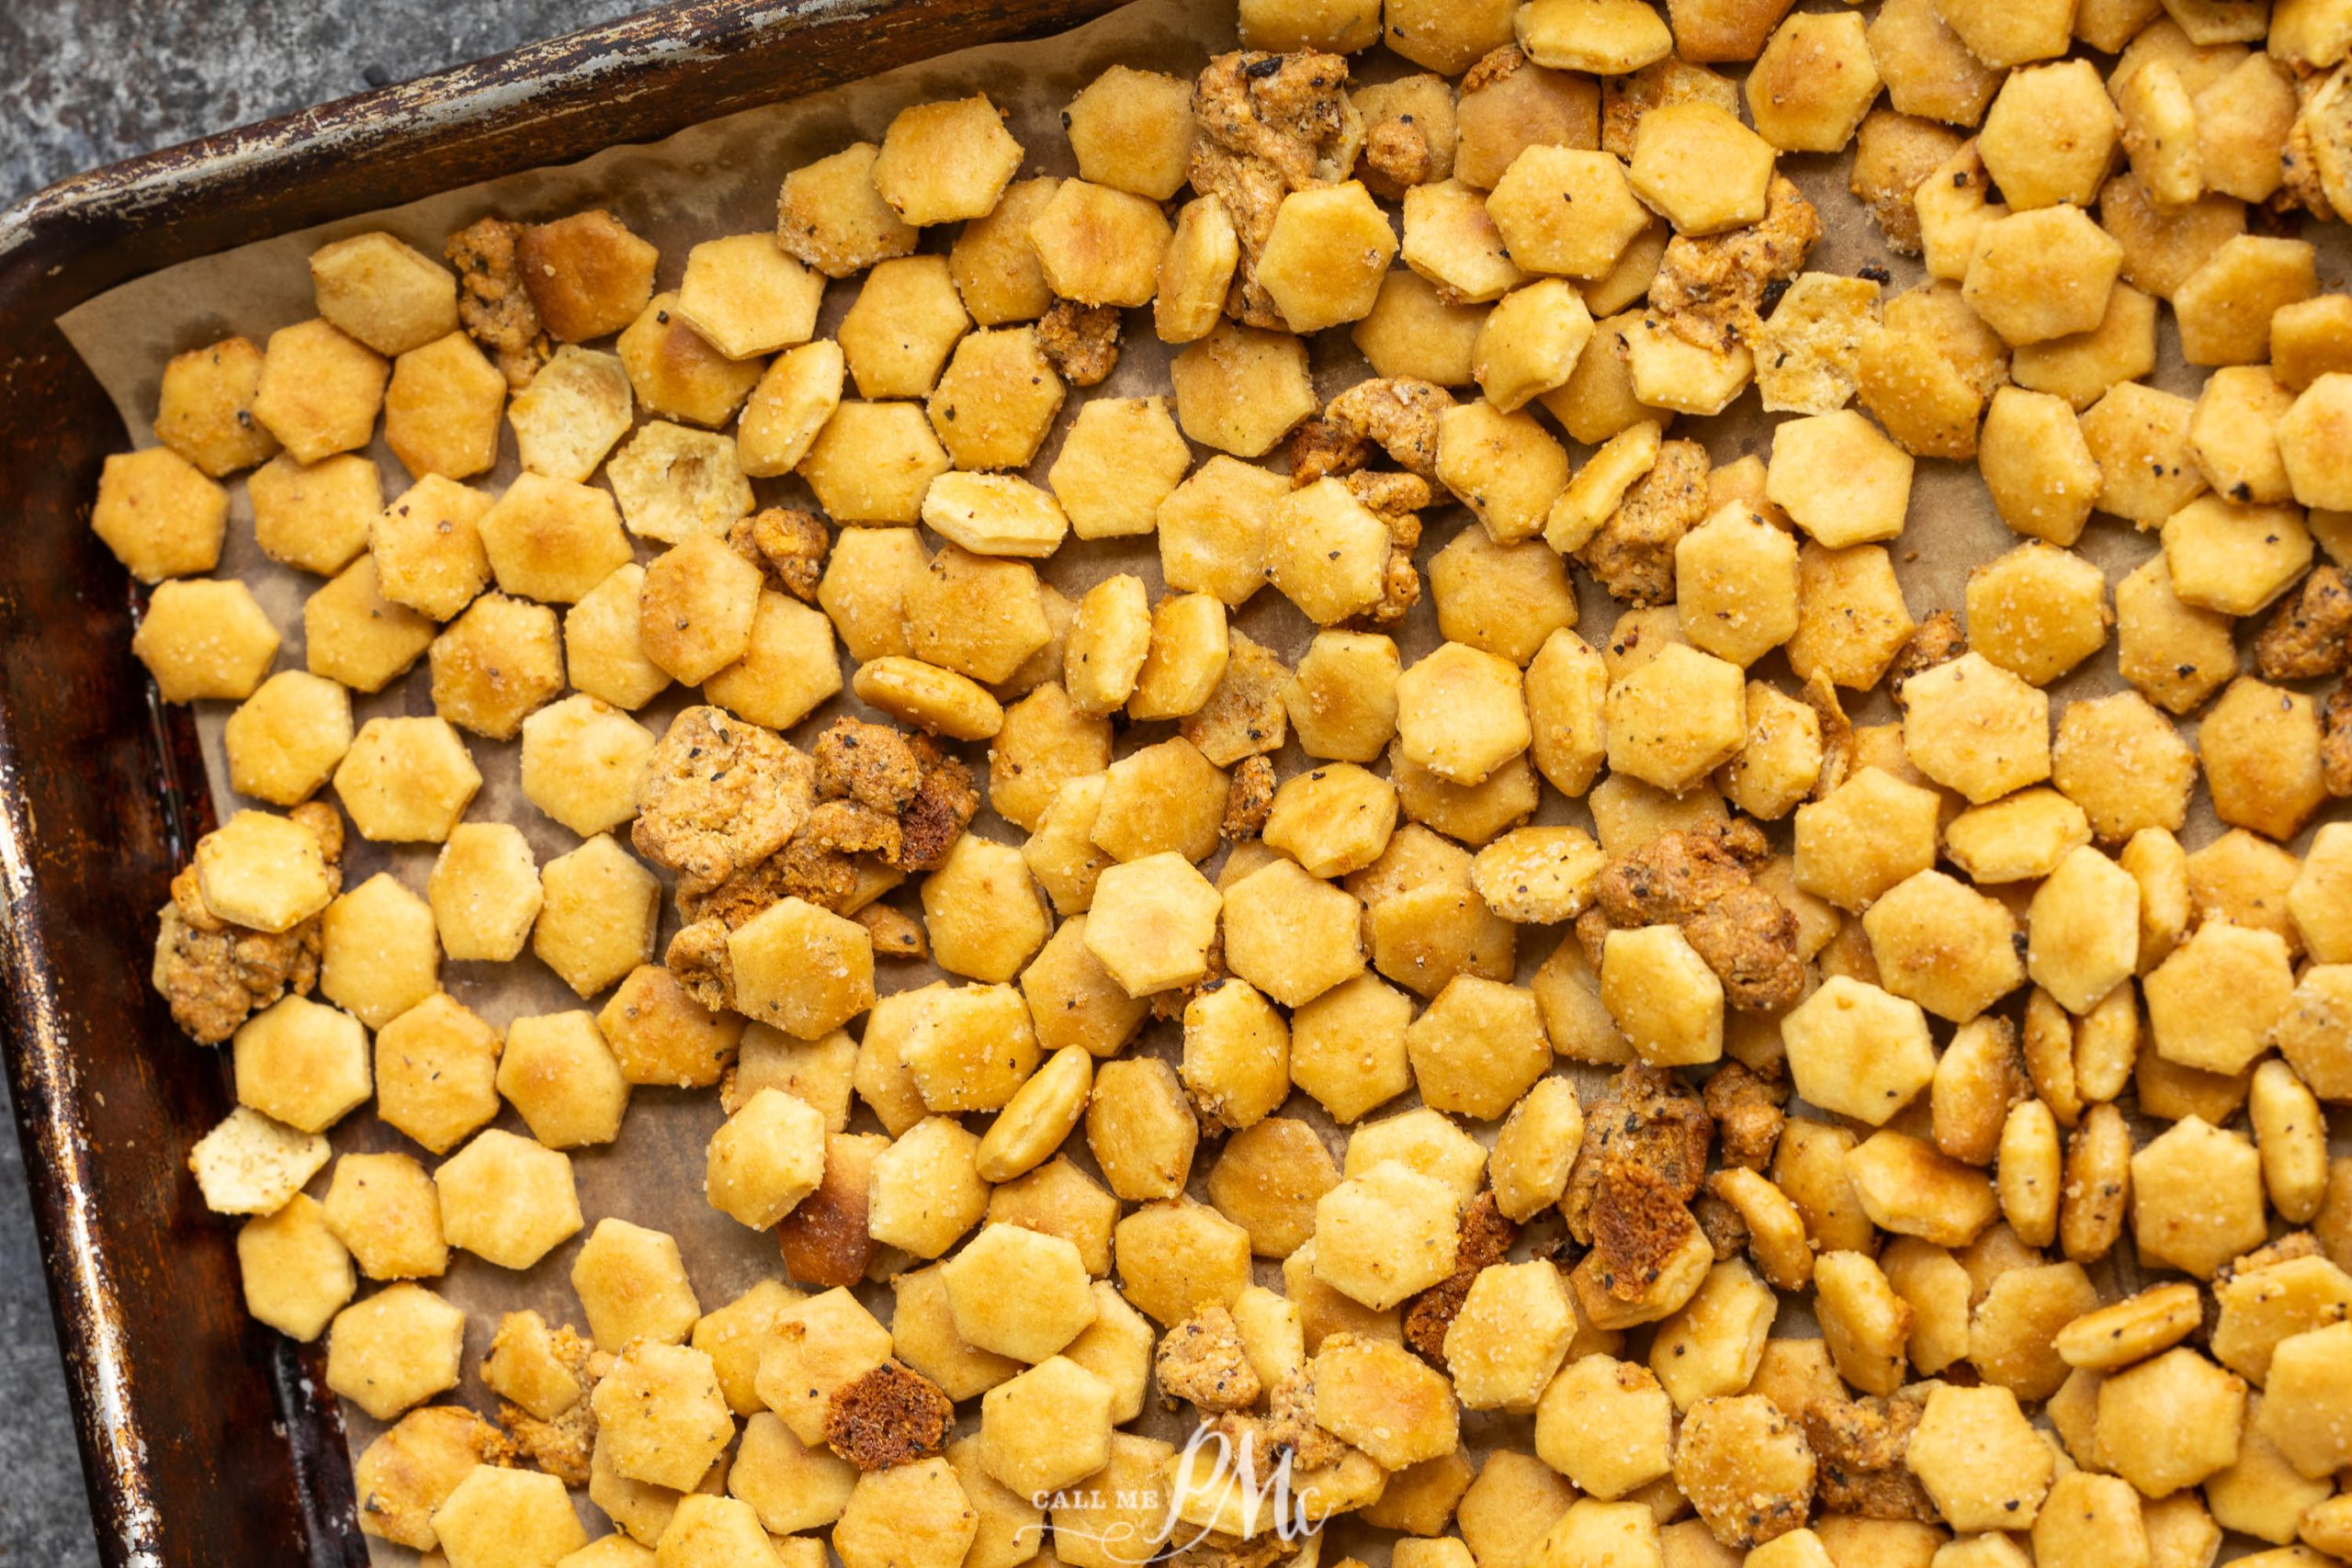 A baking sheet is filled with small, hexagonal crackers and bits of other small snacks, all toasted to a golden-brown color. The edges of the baking sheet are slightly charred.